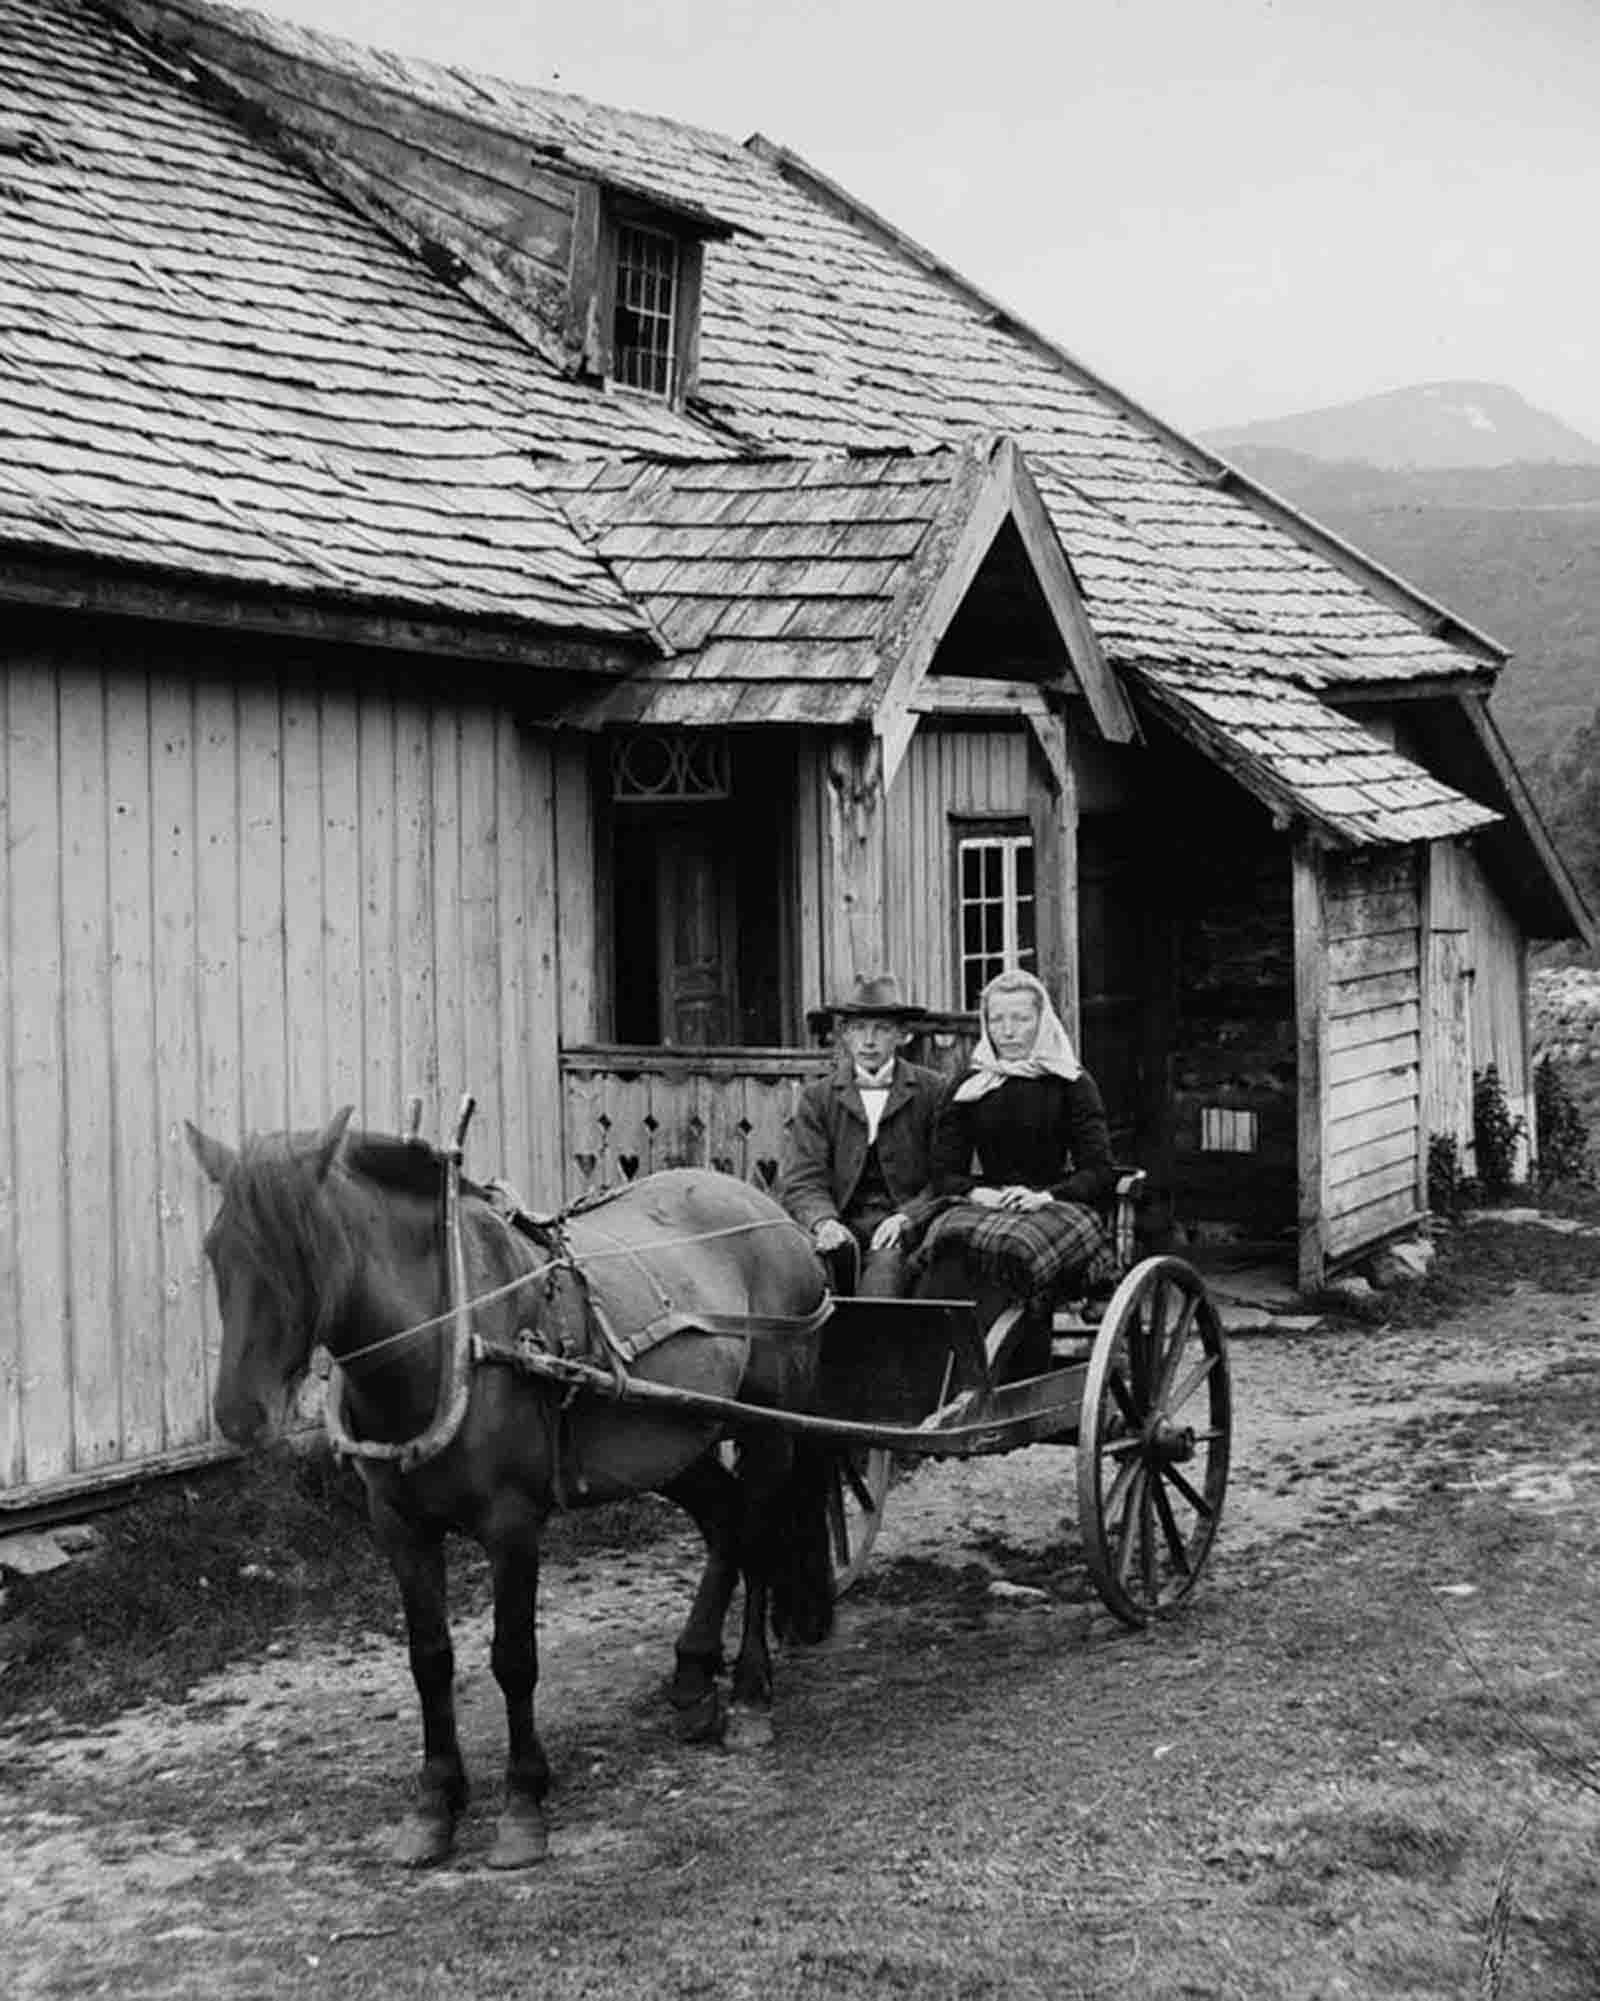 The Rural Life of Norway in the 1900s Through Stunning Photos of Nils Olsson Reppen